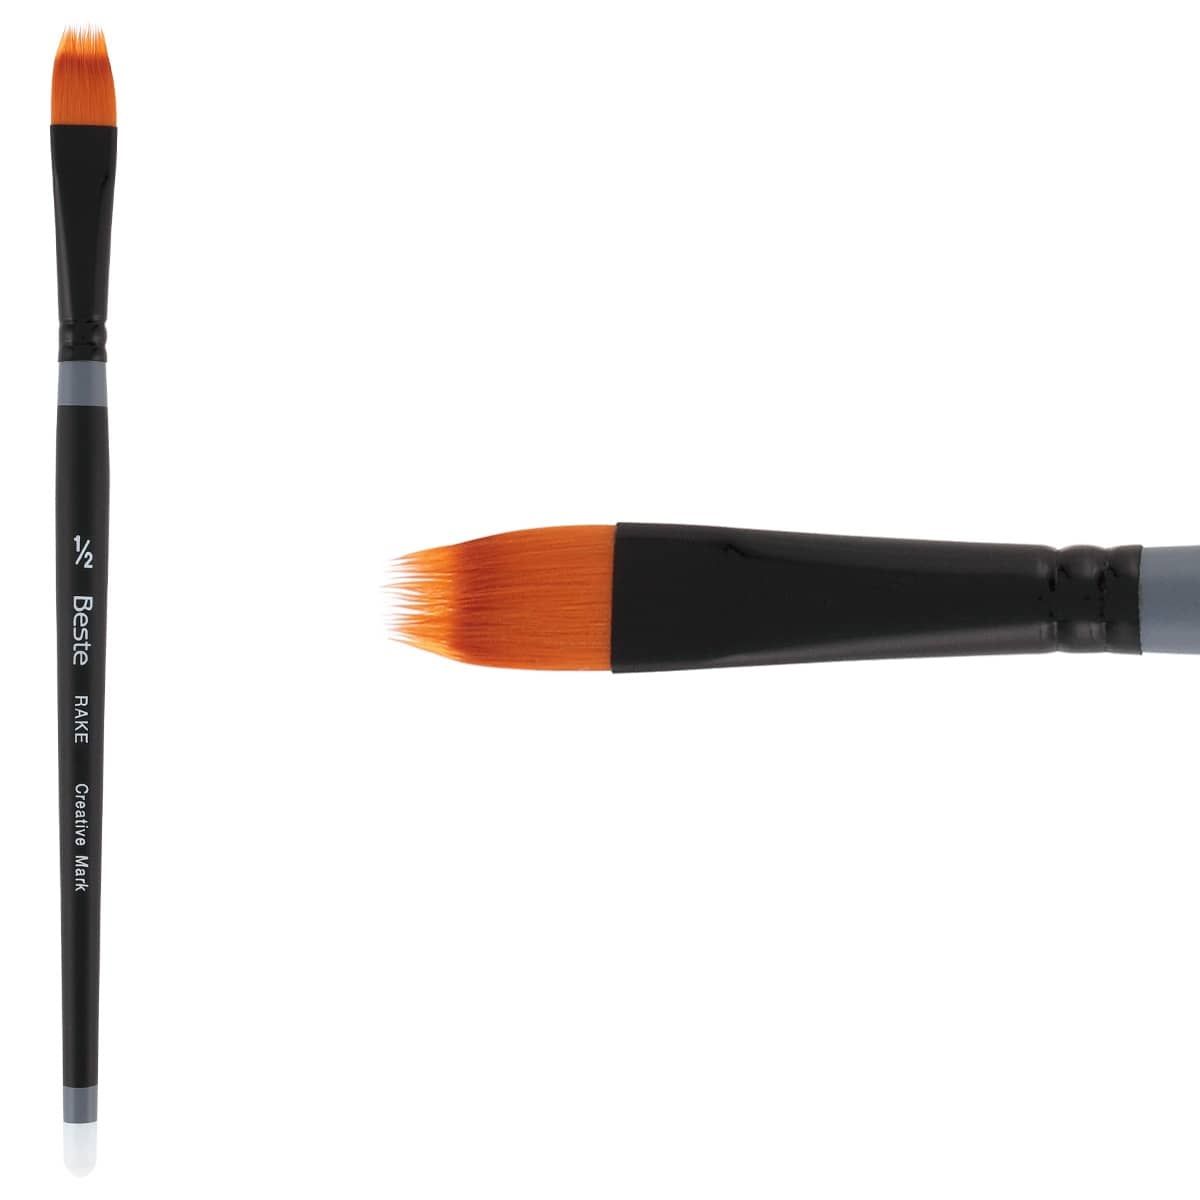 Golden Taklon Liner-10/0 Brush by Brushes and More - Brushes and More